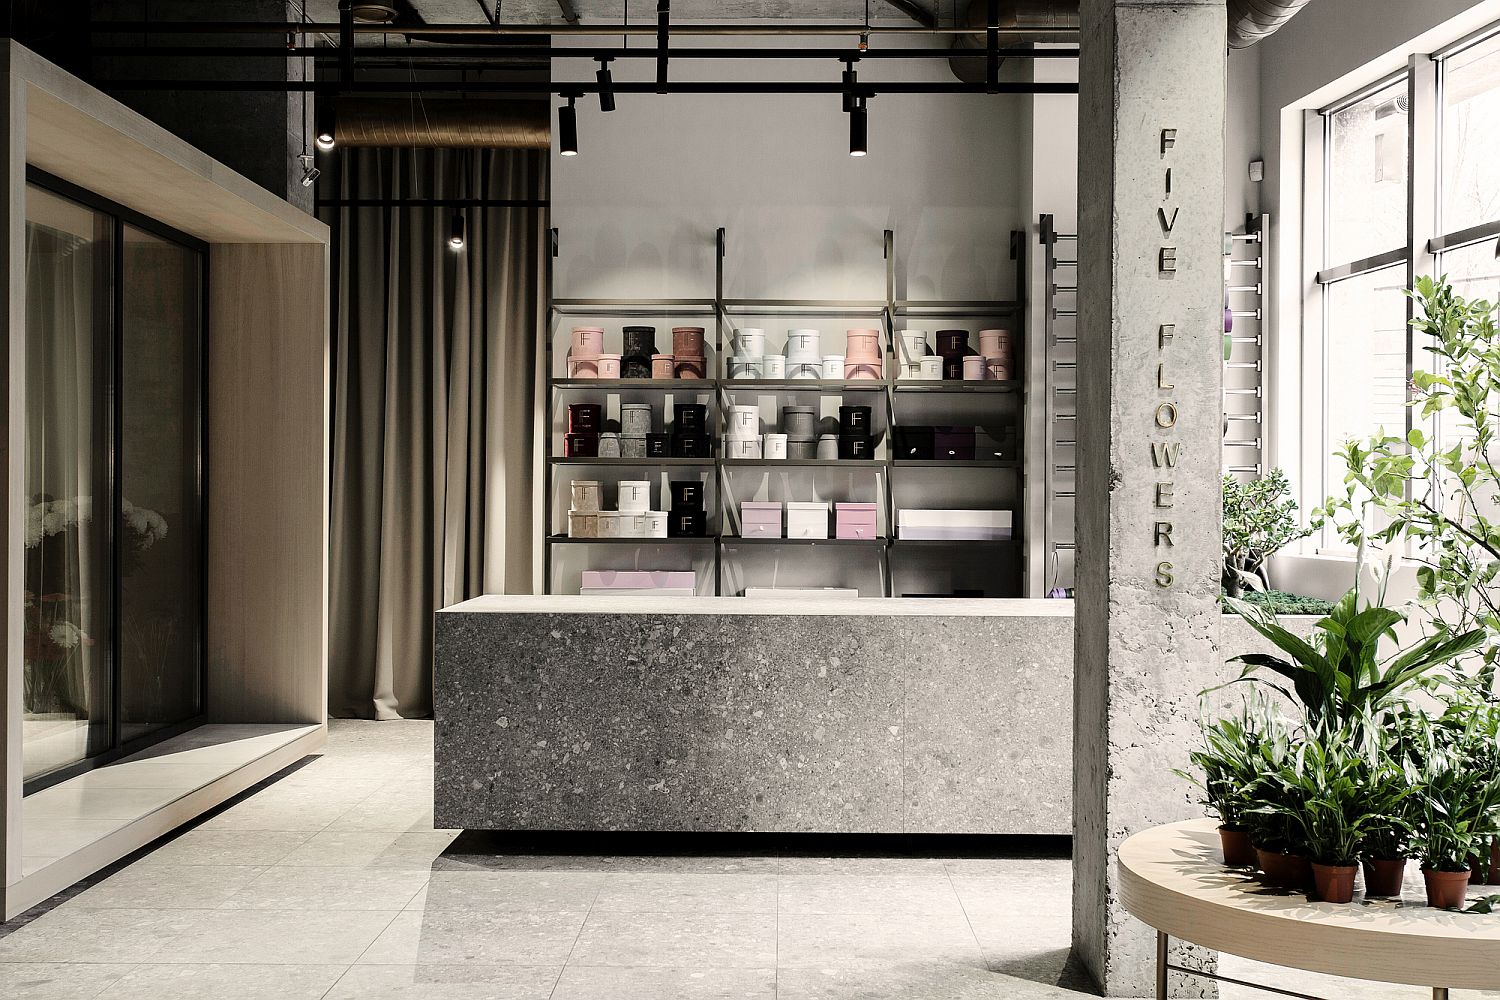 Contemporary store in Dnipropetrovsk, Ukrain combines the beauty of flowers with rugged industrial charm